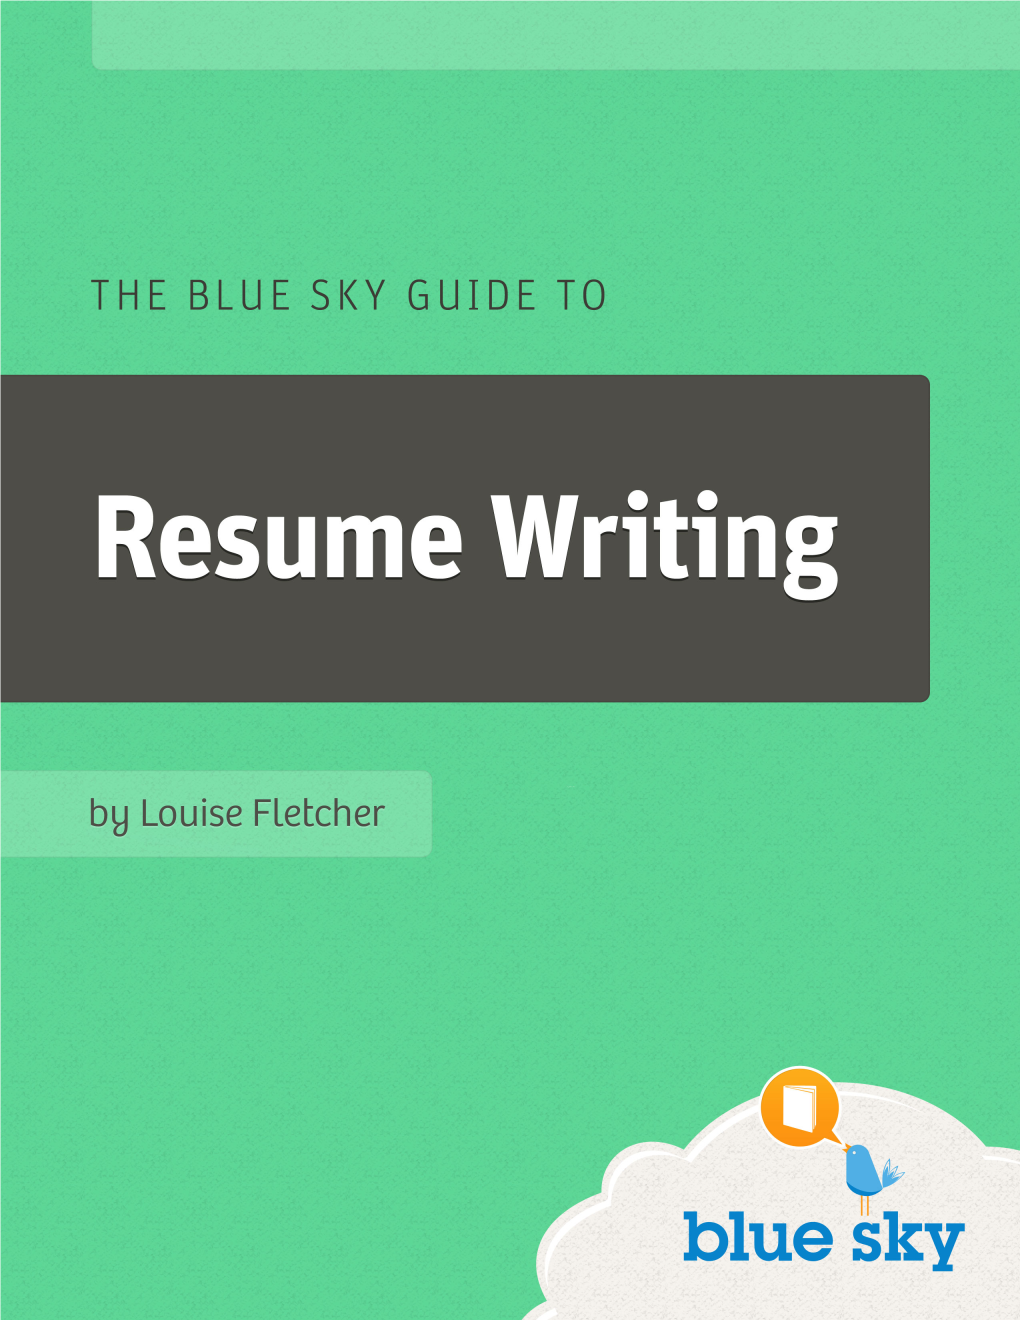 Resumes for Career Changers I Am Often Asked How to Write Resumes for Career Change, and My Answer Is Always That It’S the Same As Writing Any Other Resume